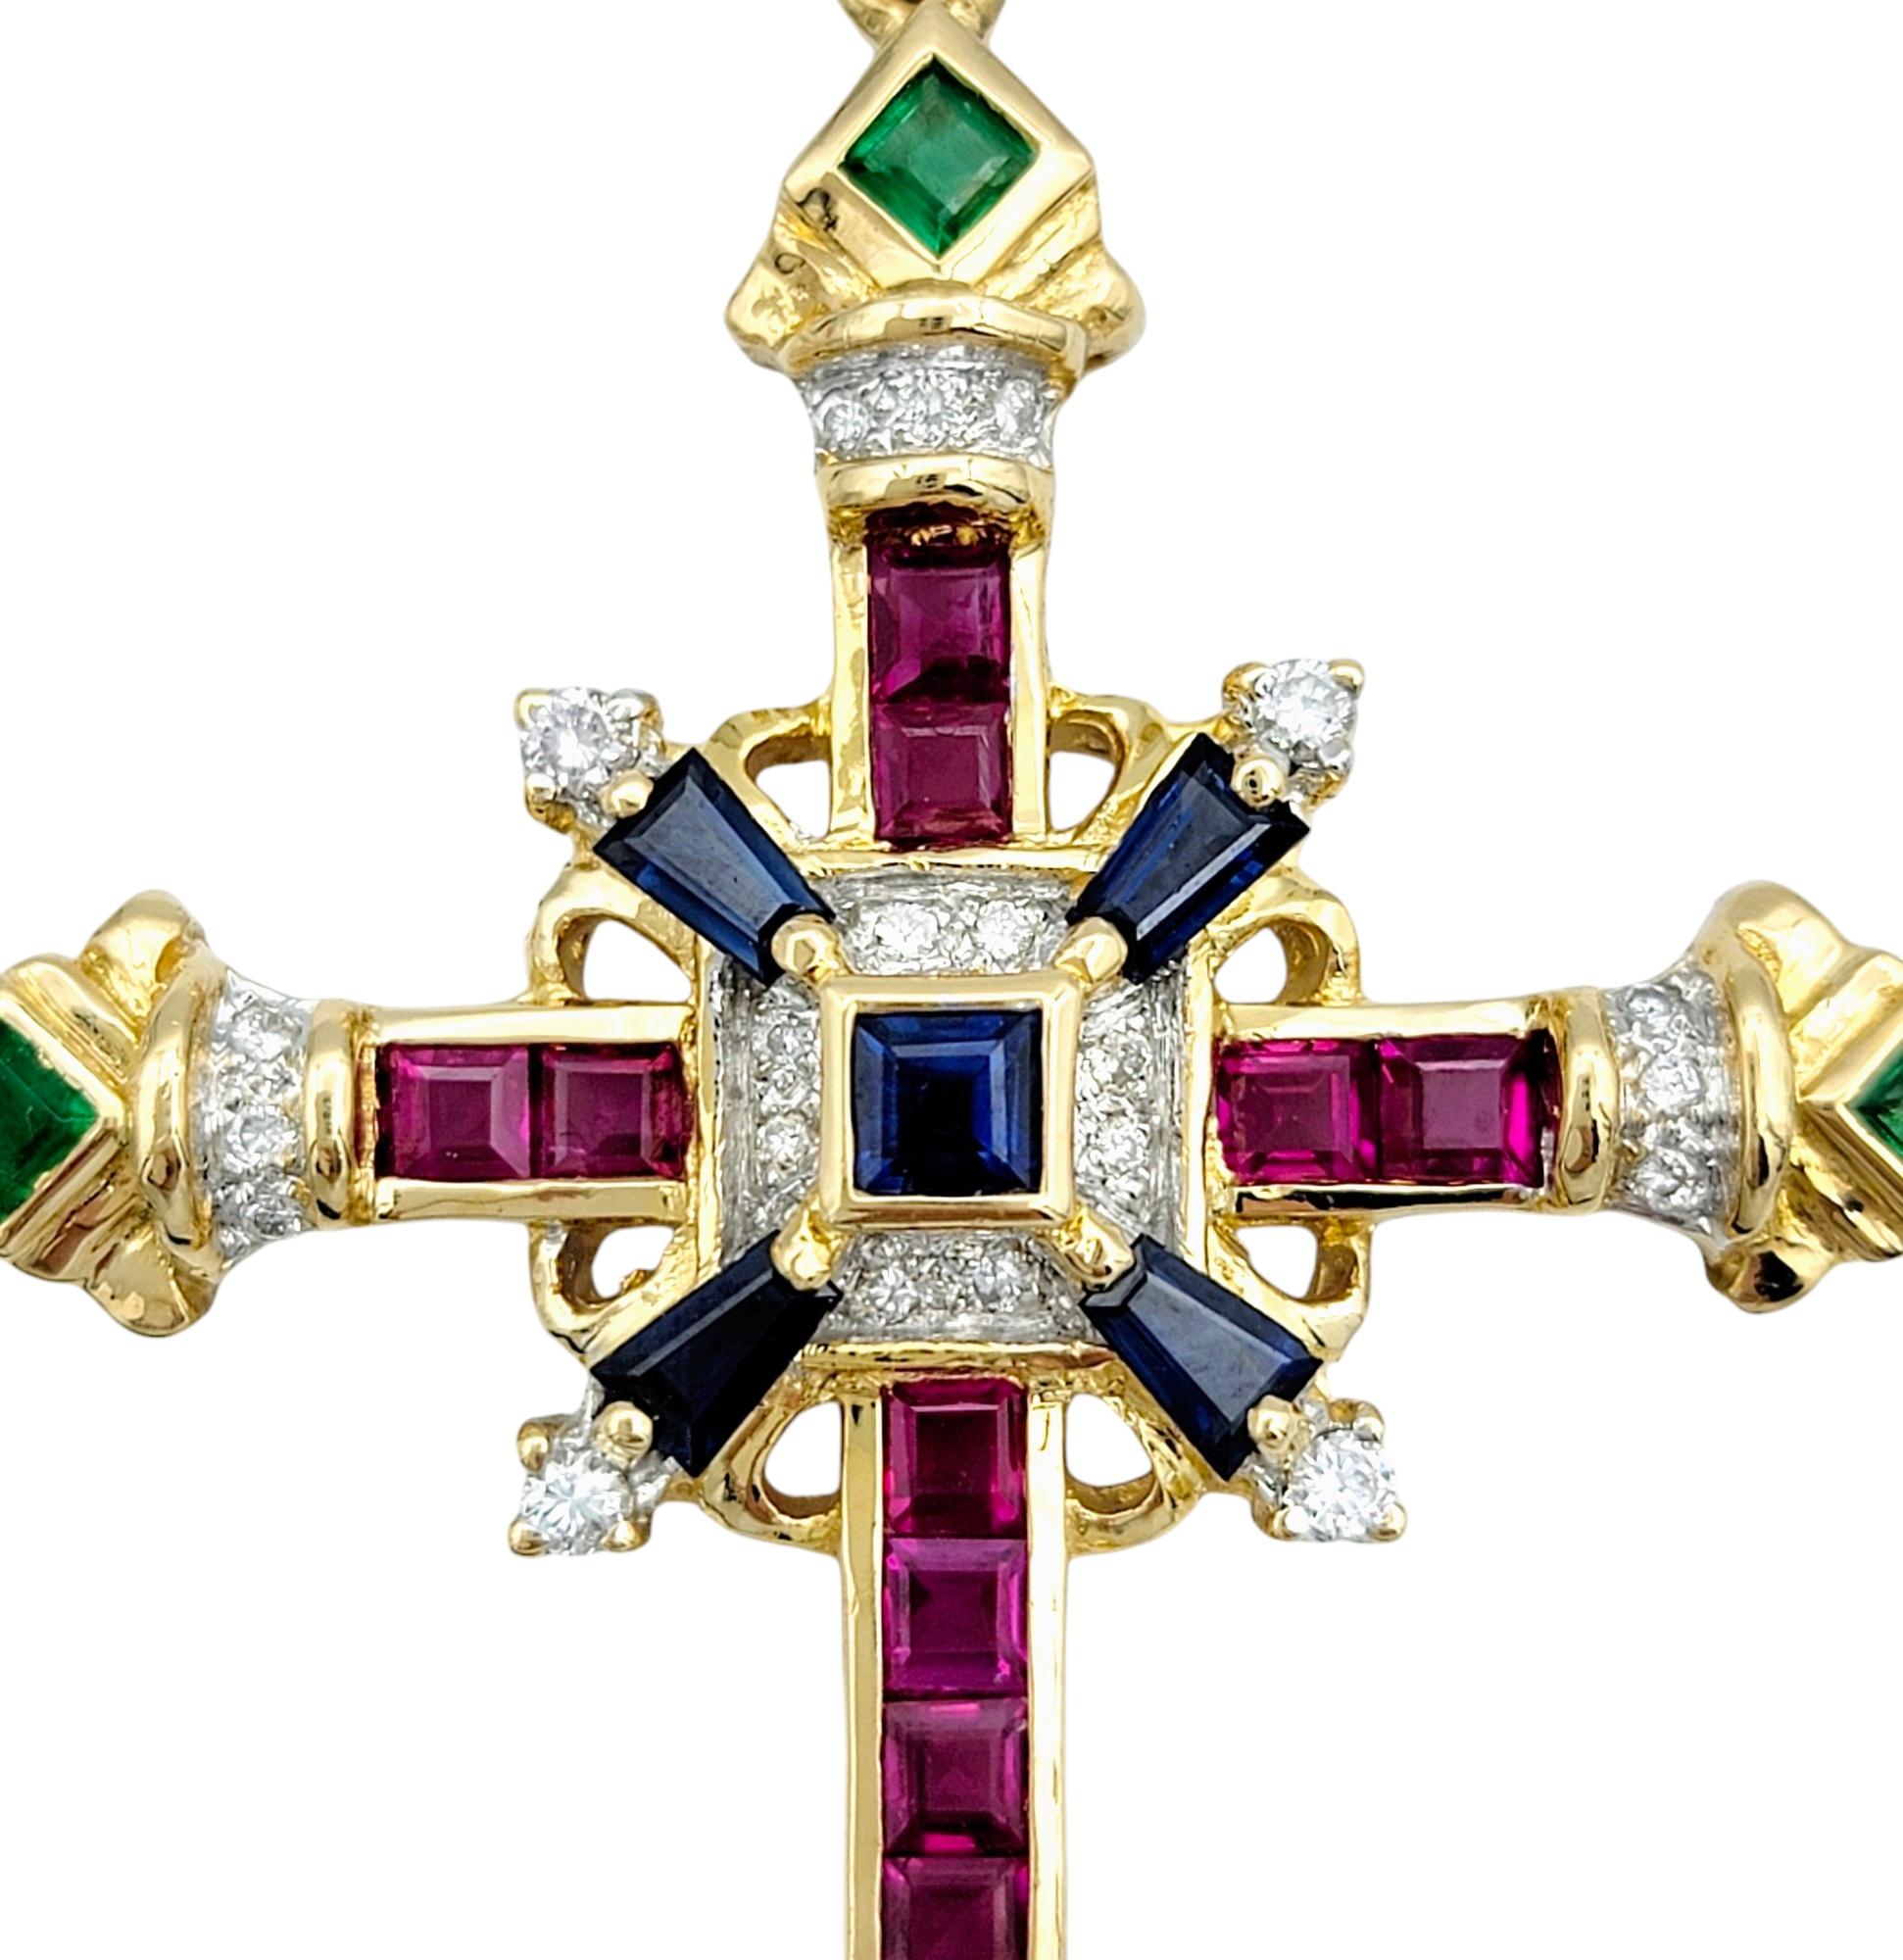 This beautiful cross pendant, crafted in luxurious 18 karat yellow gold, is adorned with a vibrant array of gemstones. Set against the rich backdrop of yellow gold, the sapphires, rubies, emeralds, and diamonds create a stunning mosaic of colors